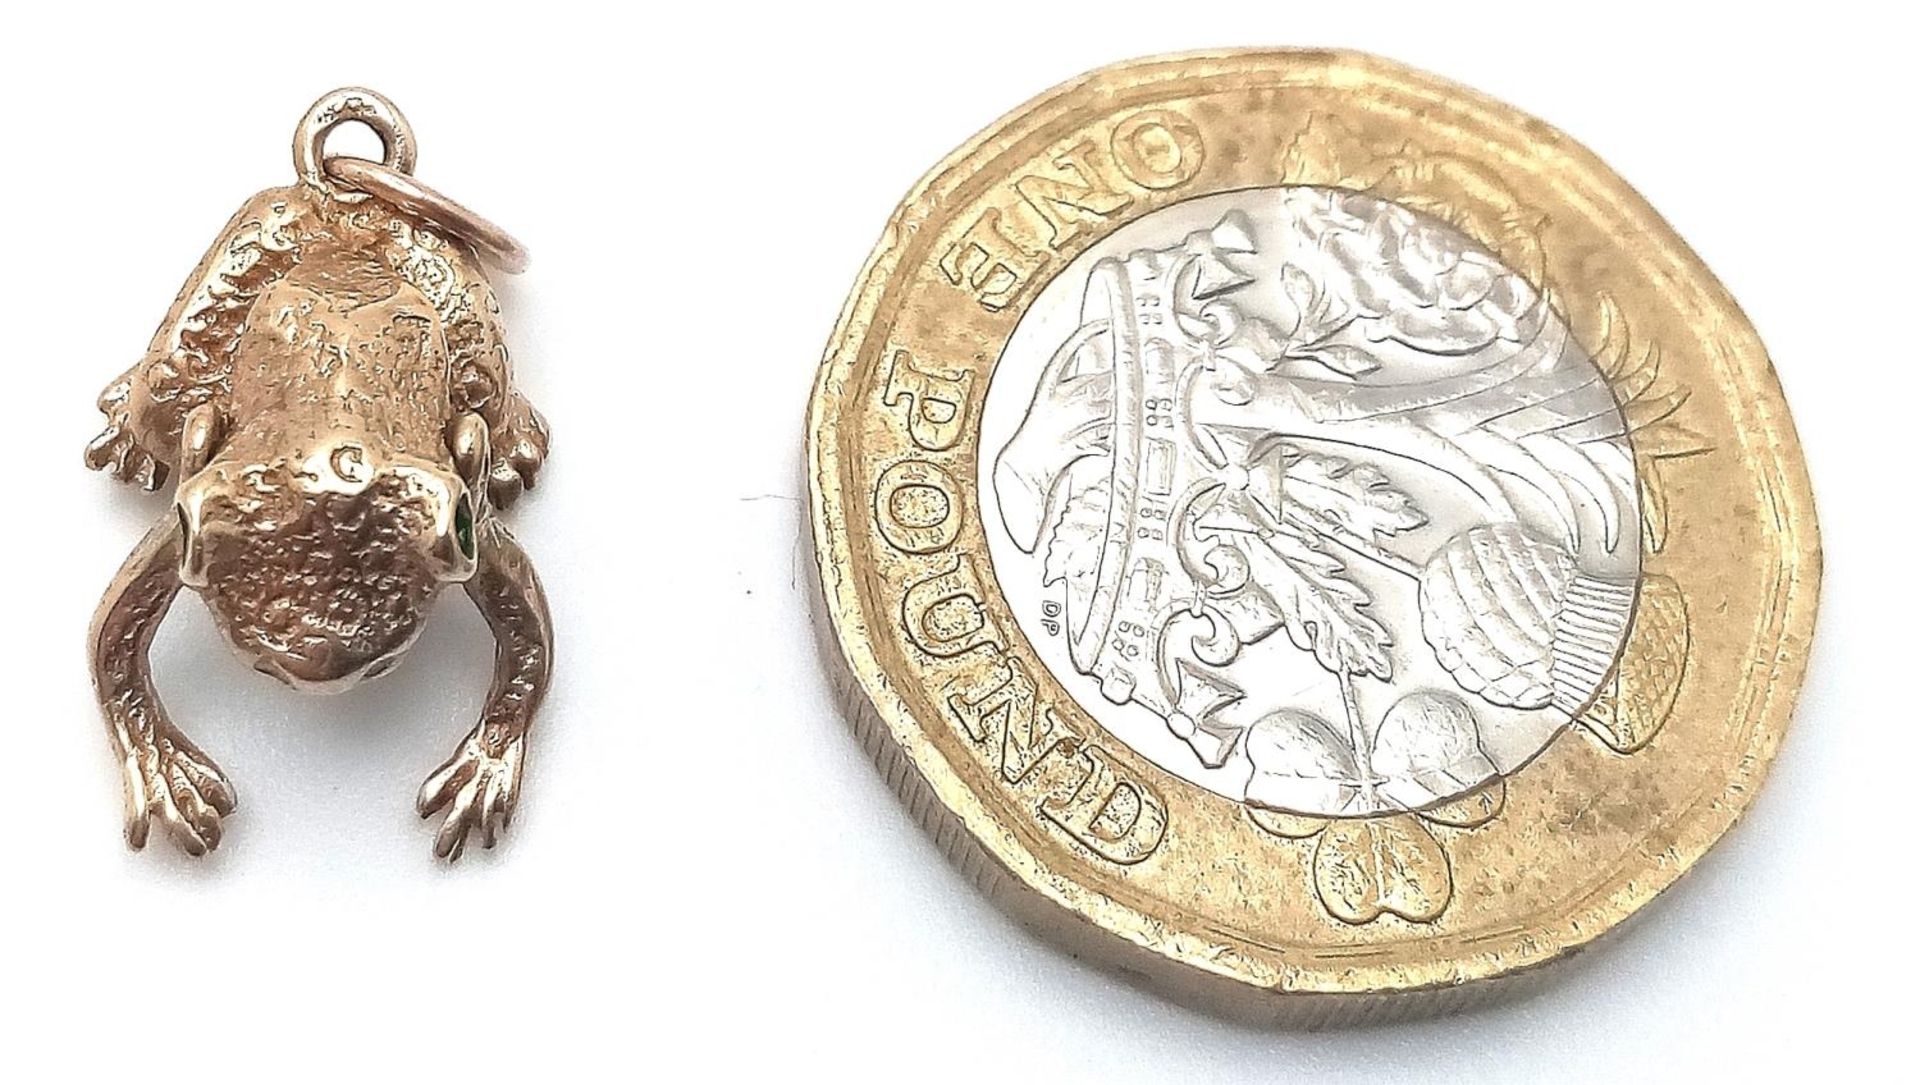 A 9K YELLOW GOLD FROG CHARM WITH GREEN EYES AND MOVING FROG LEGS AND MOUTH. 19mm length, 2.6g - Bild 4 aus 4